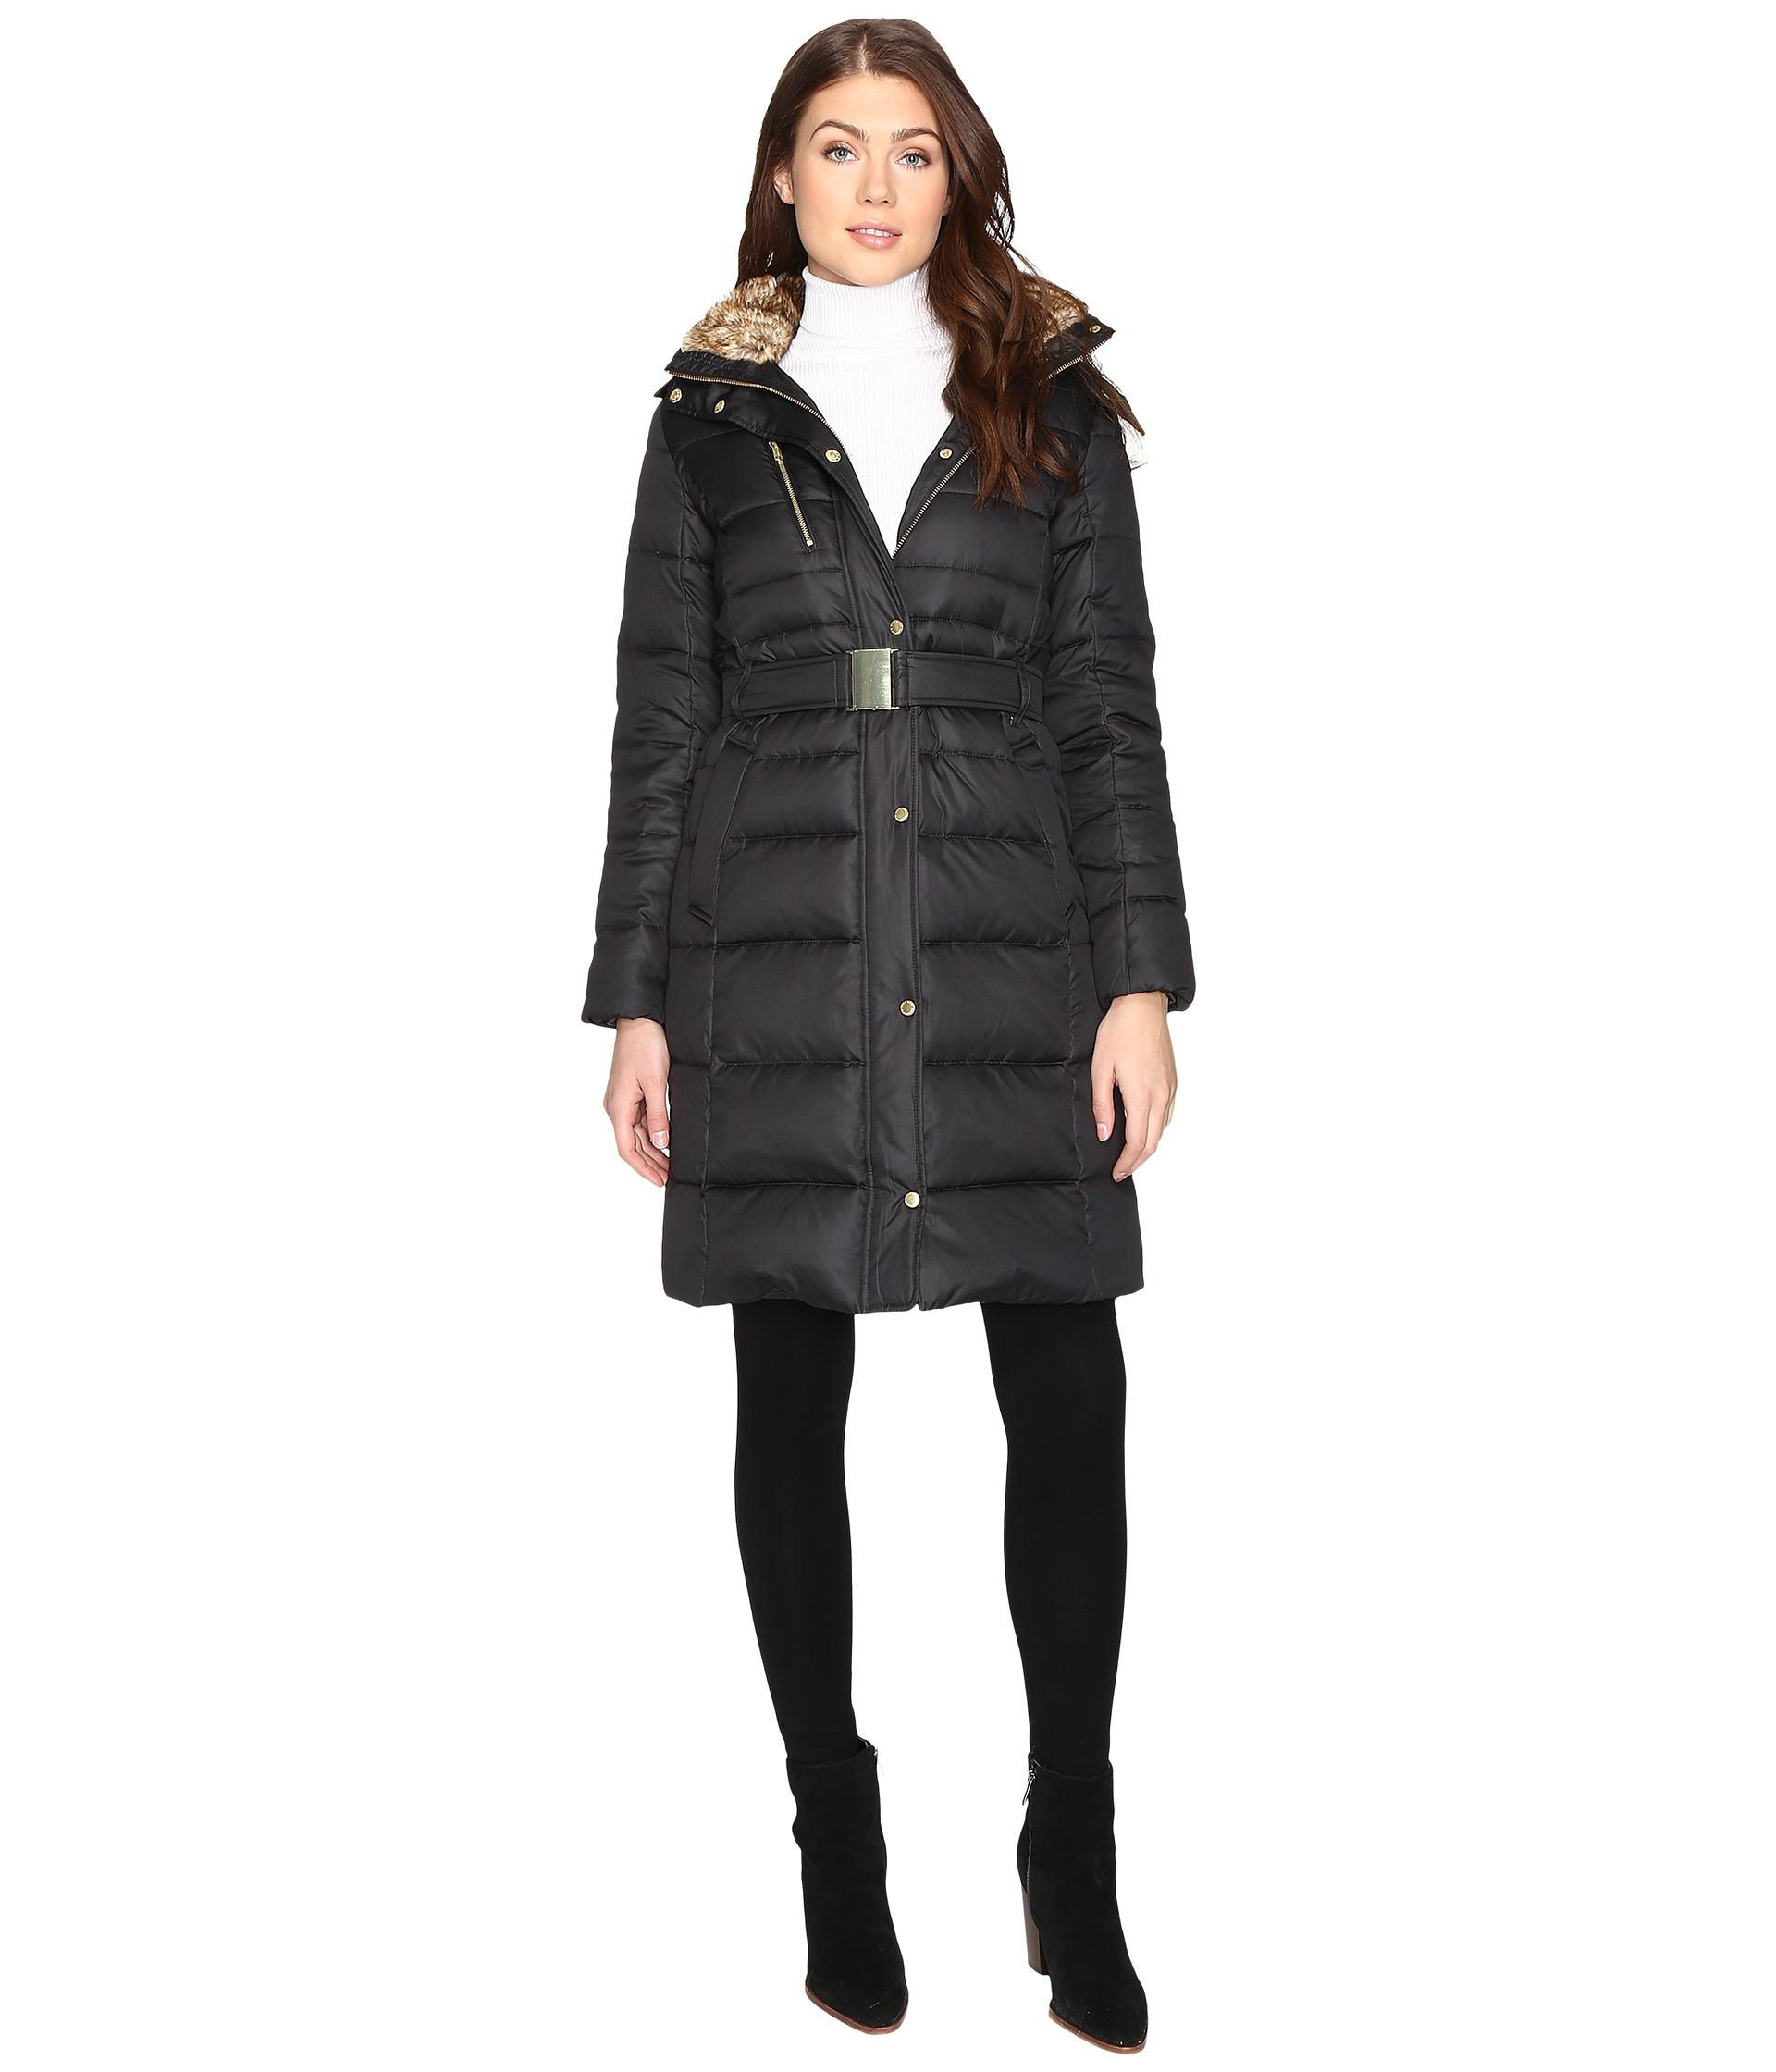 Cole Haan Signature Quilted Coat With Faux Fur Lining in Black - Lyst